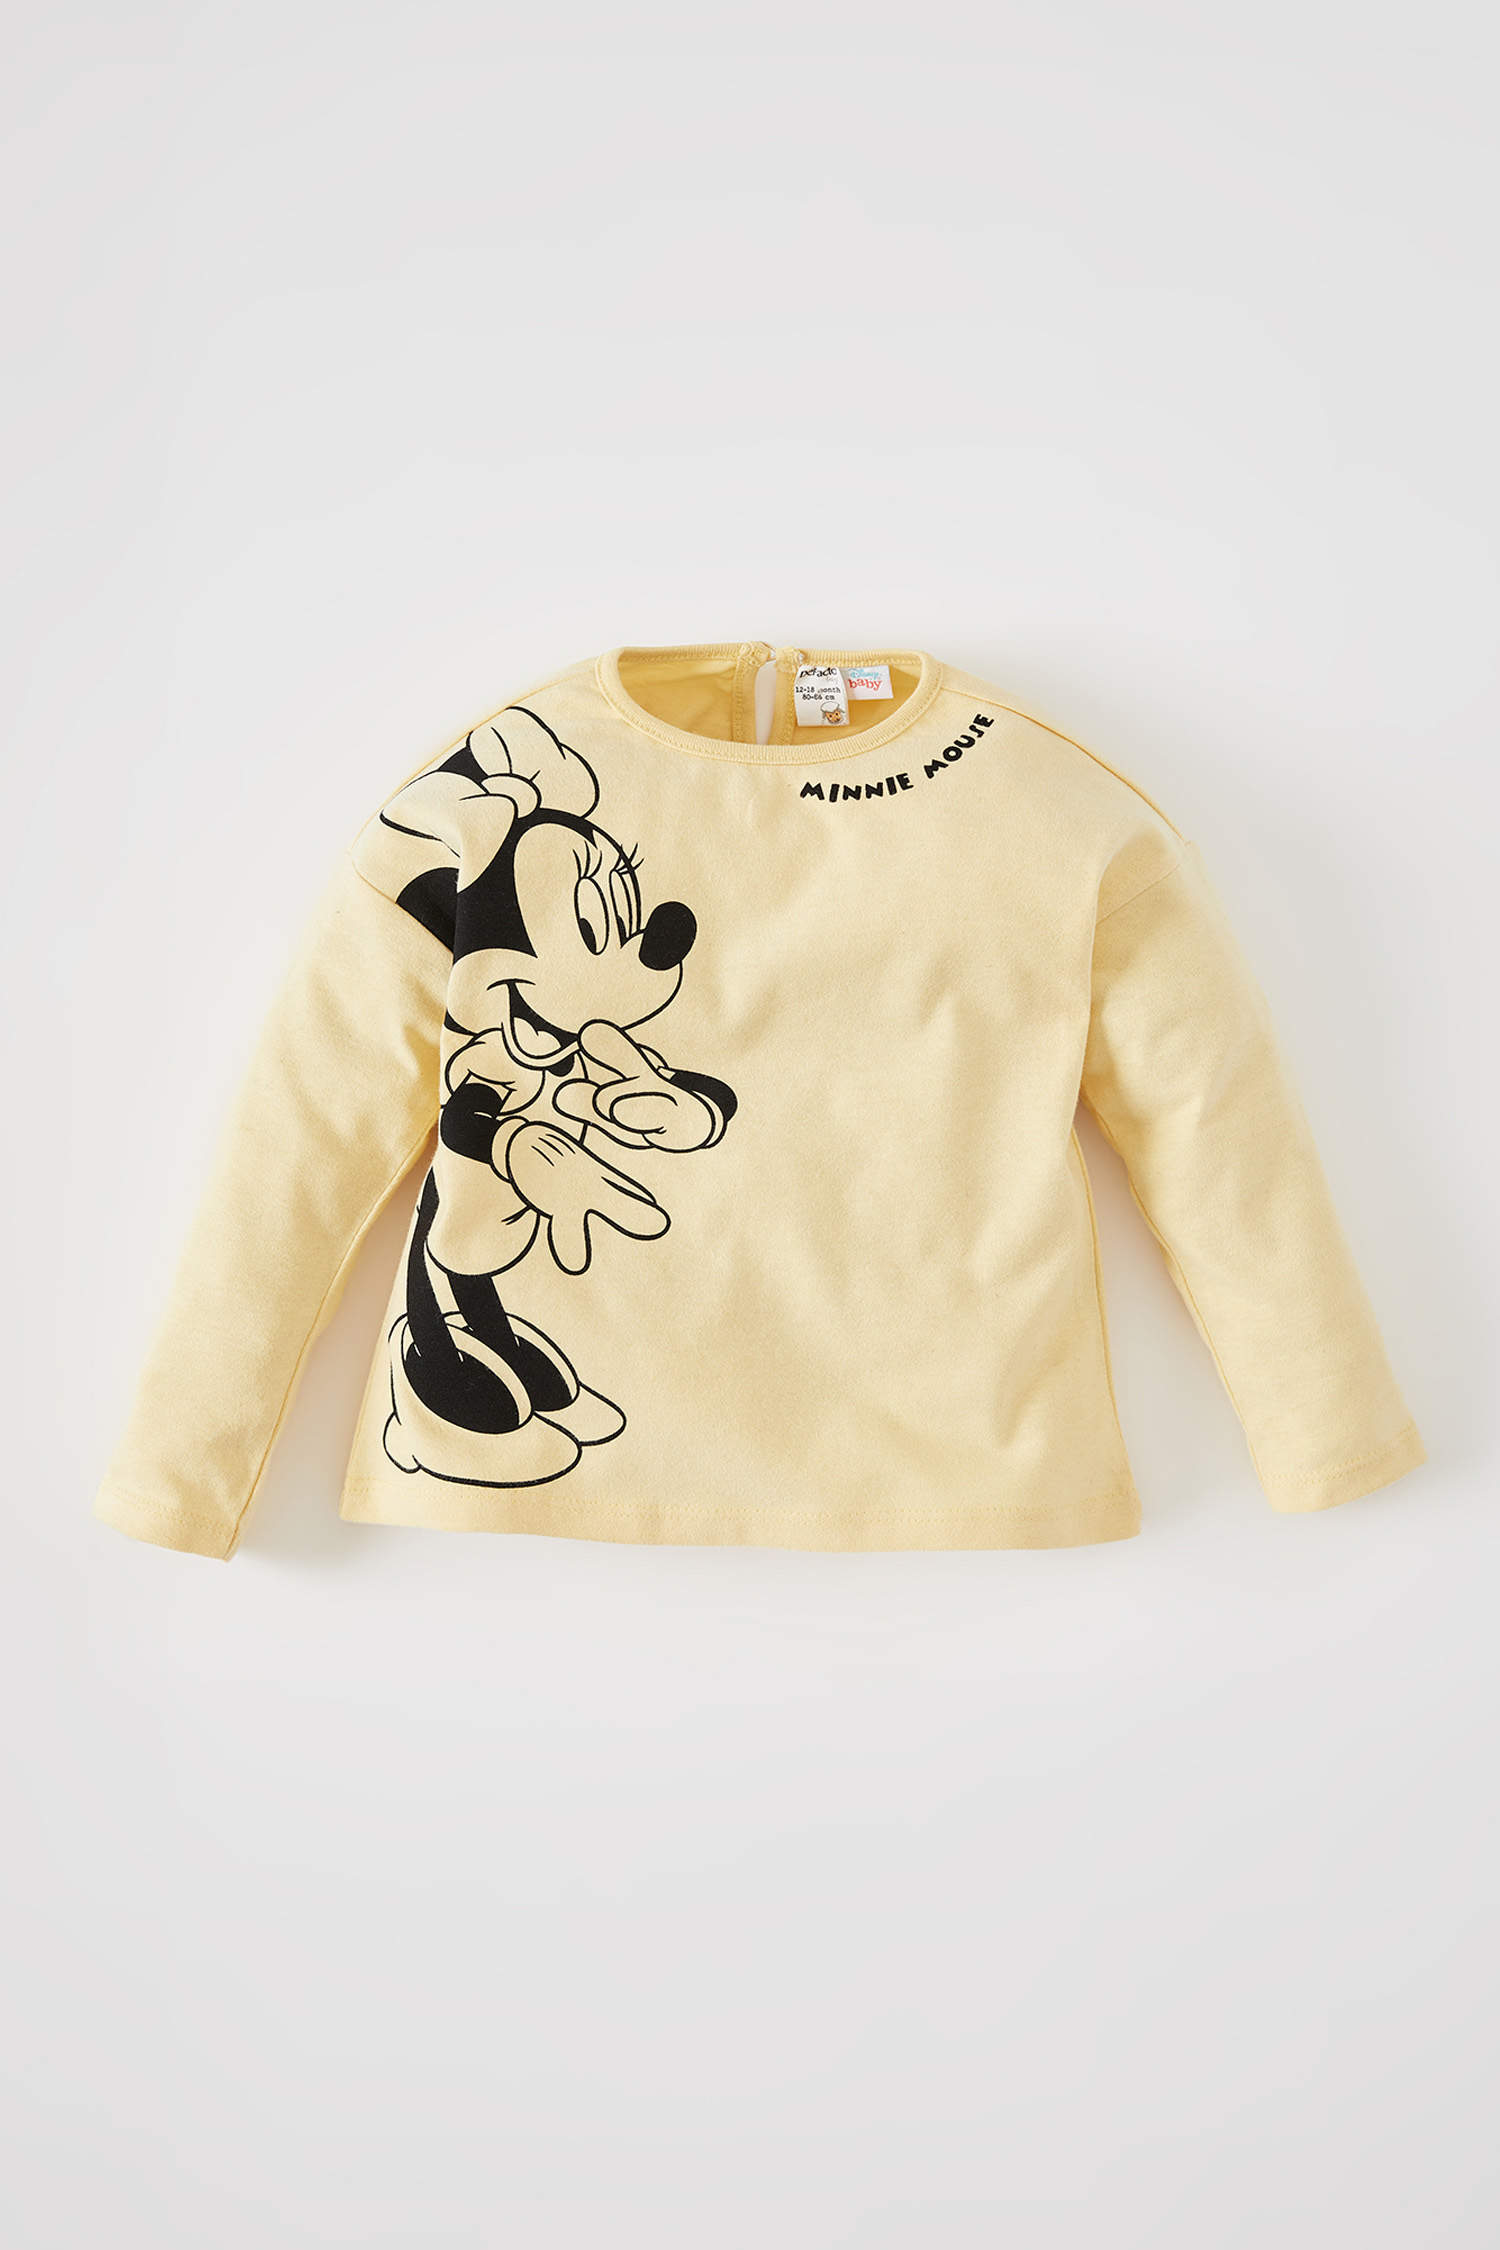 Minnie Mouse Baby-Girls Long Sleeves T Shirt 